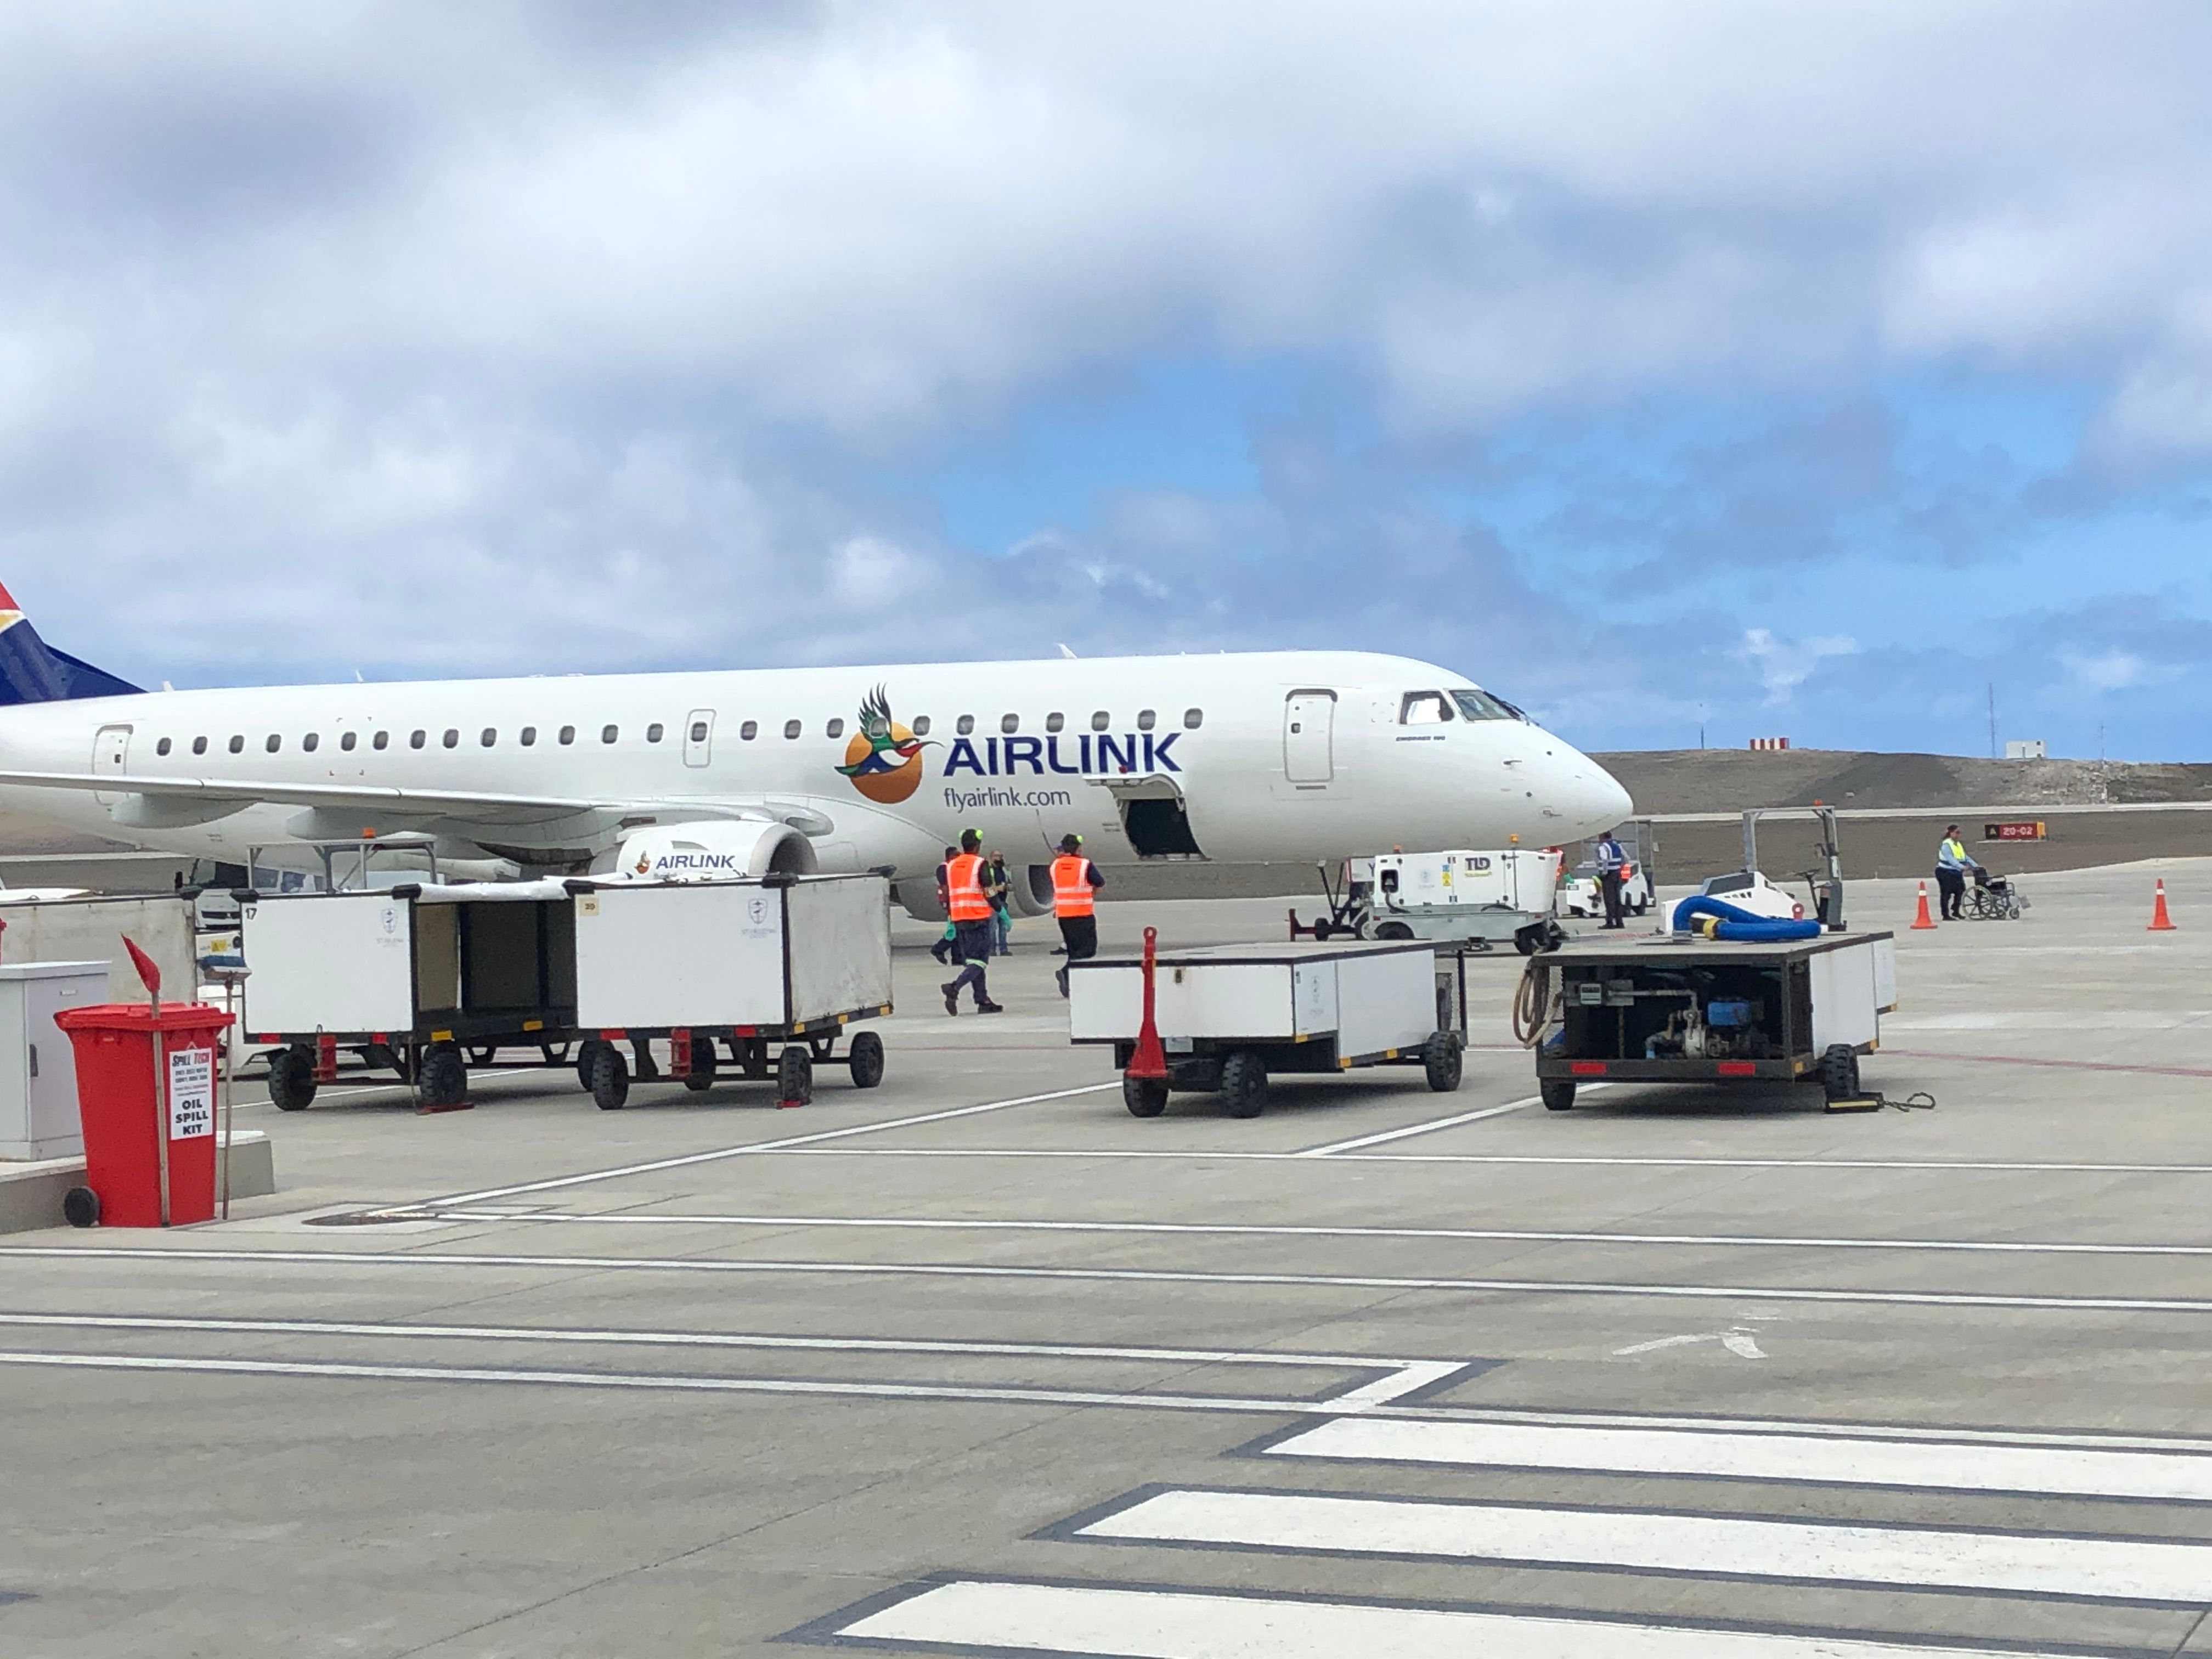 Airlink Embraer E190 at St. Helana airport